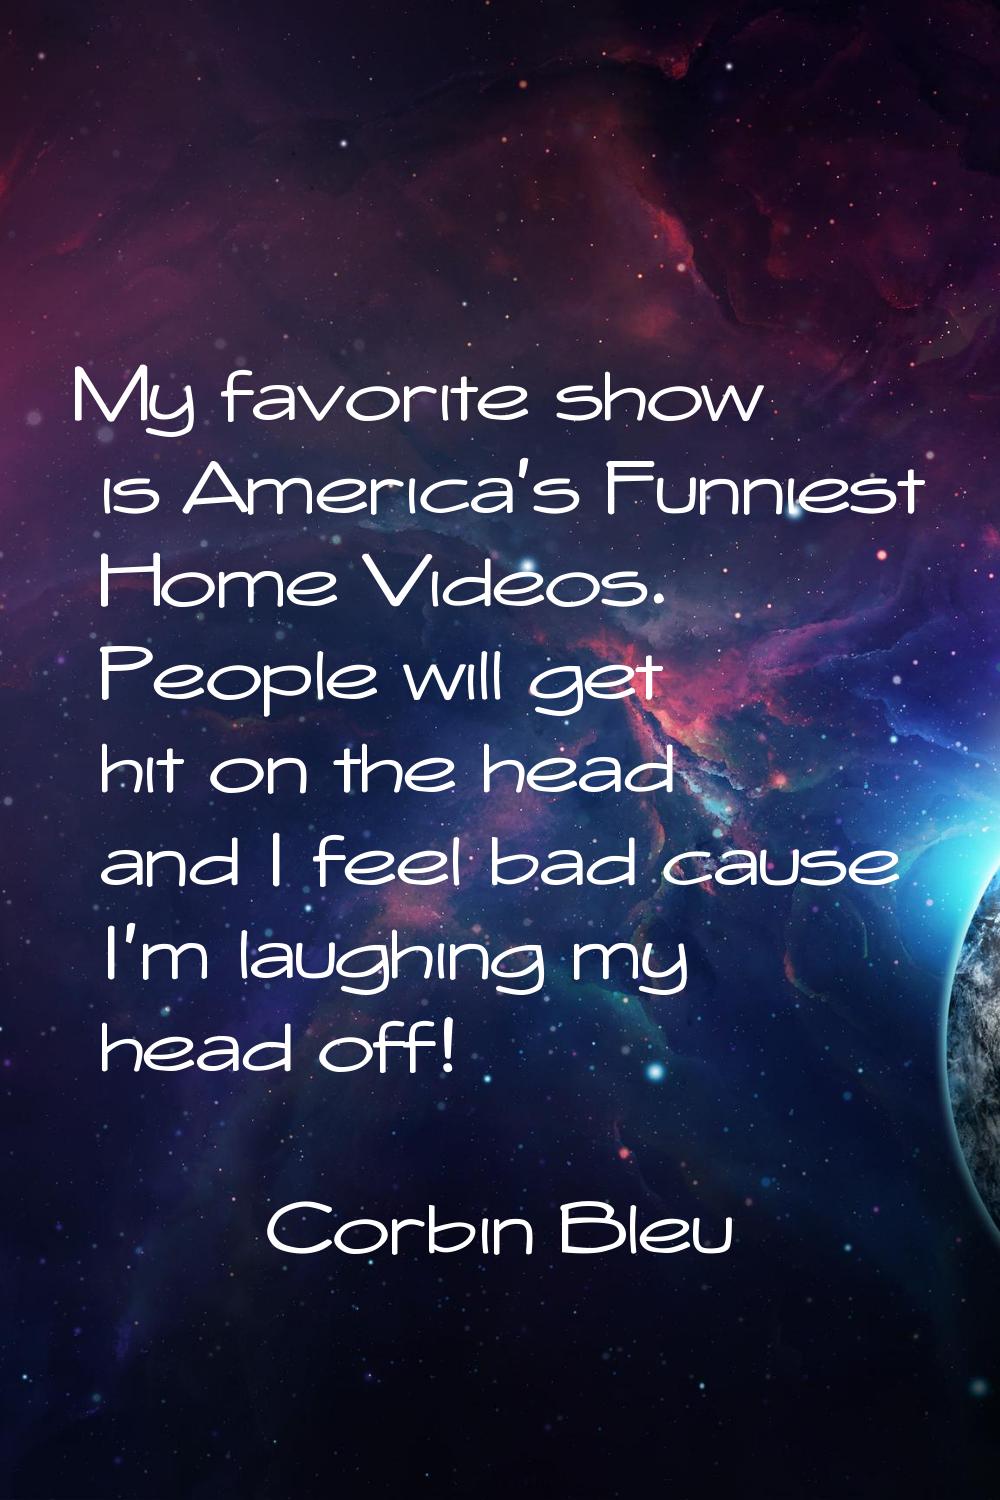 My favorite show is America's Funniest Home Videos. People will get hit on the head and I feel bad 